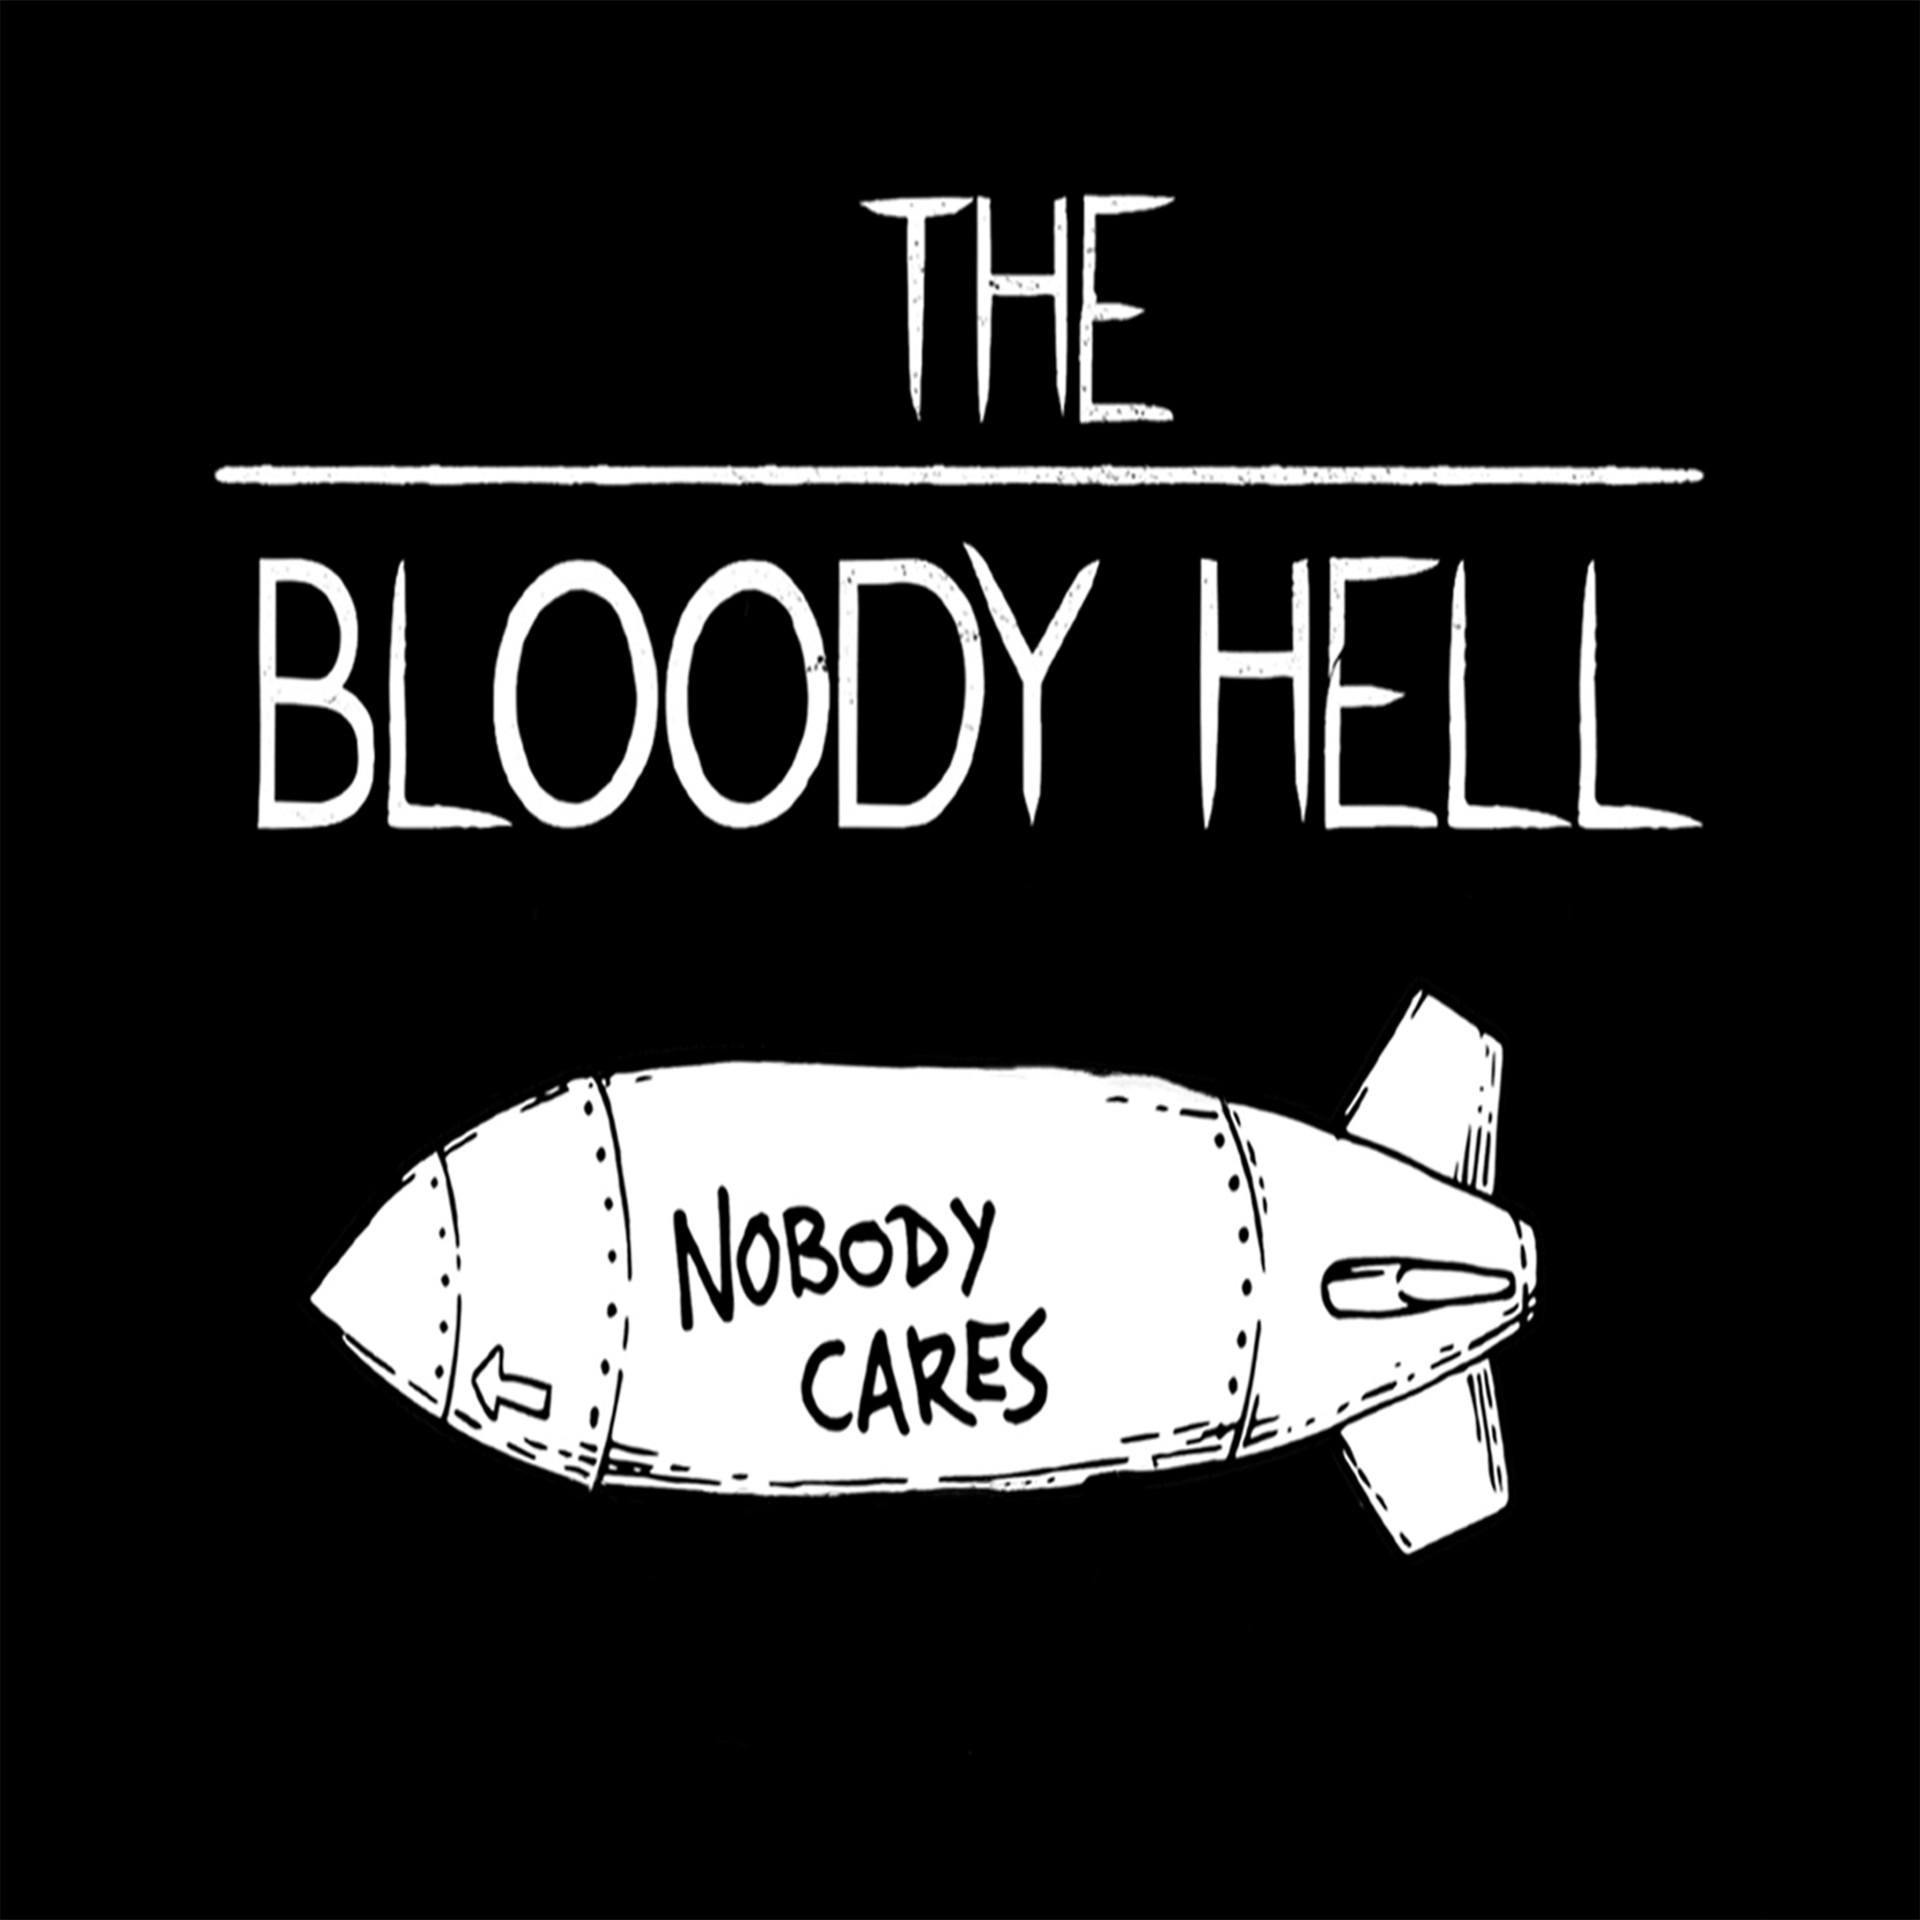 The Bloody Hell ‘Nobody Cares’ album artwork